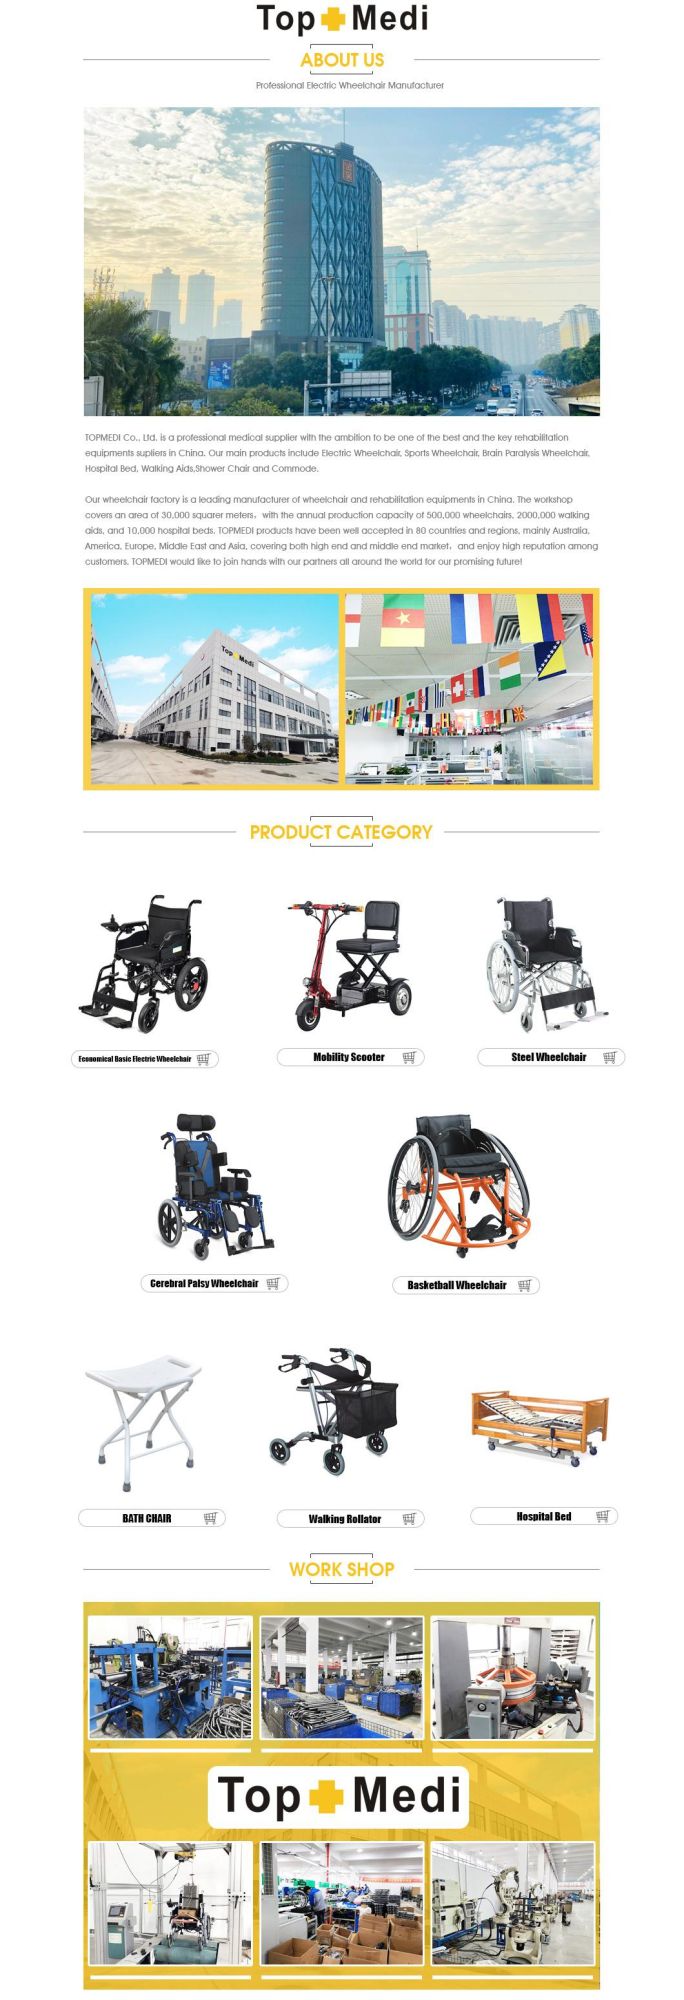 Cheapest Economical Aluminum Lightweight Portable Electric Power Wheelchair for Disabled Elderly People